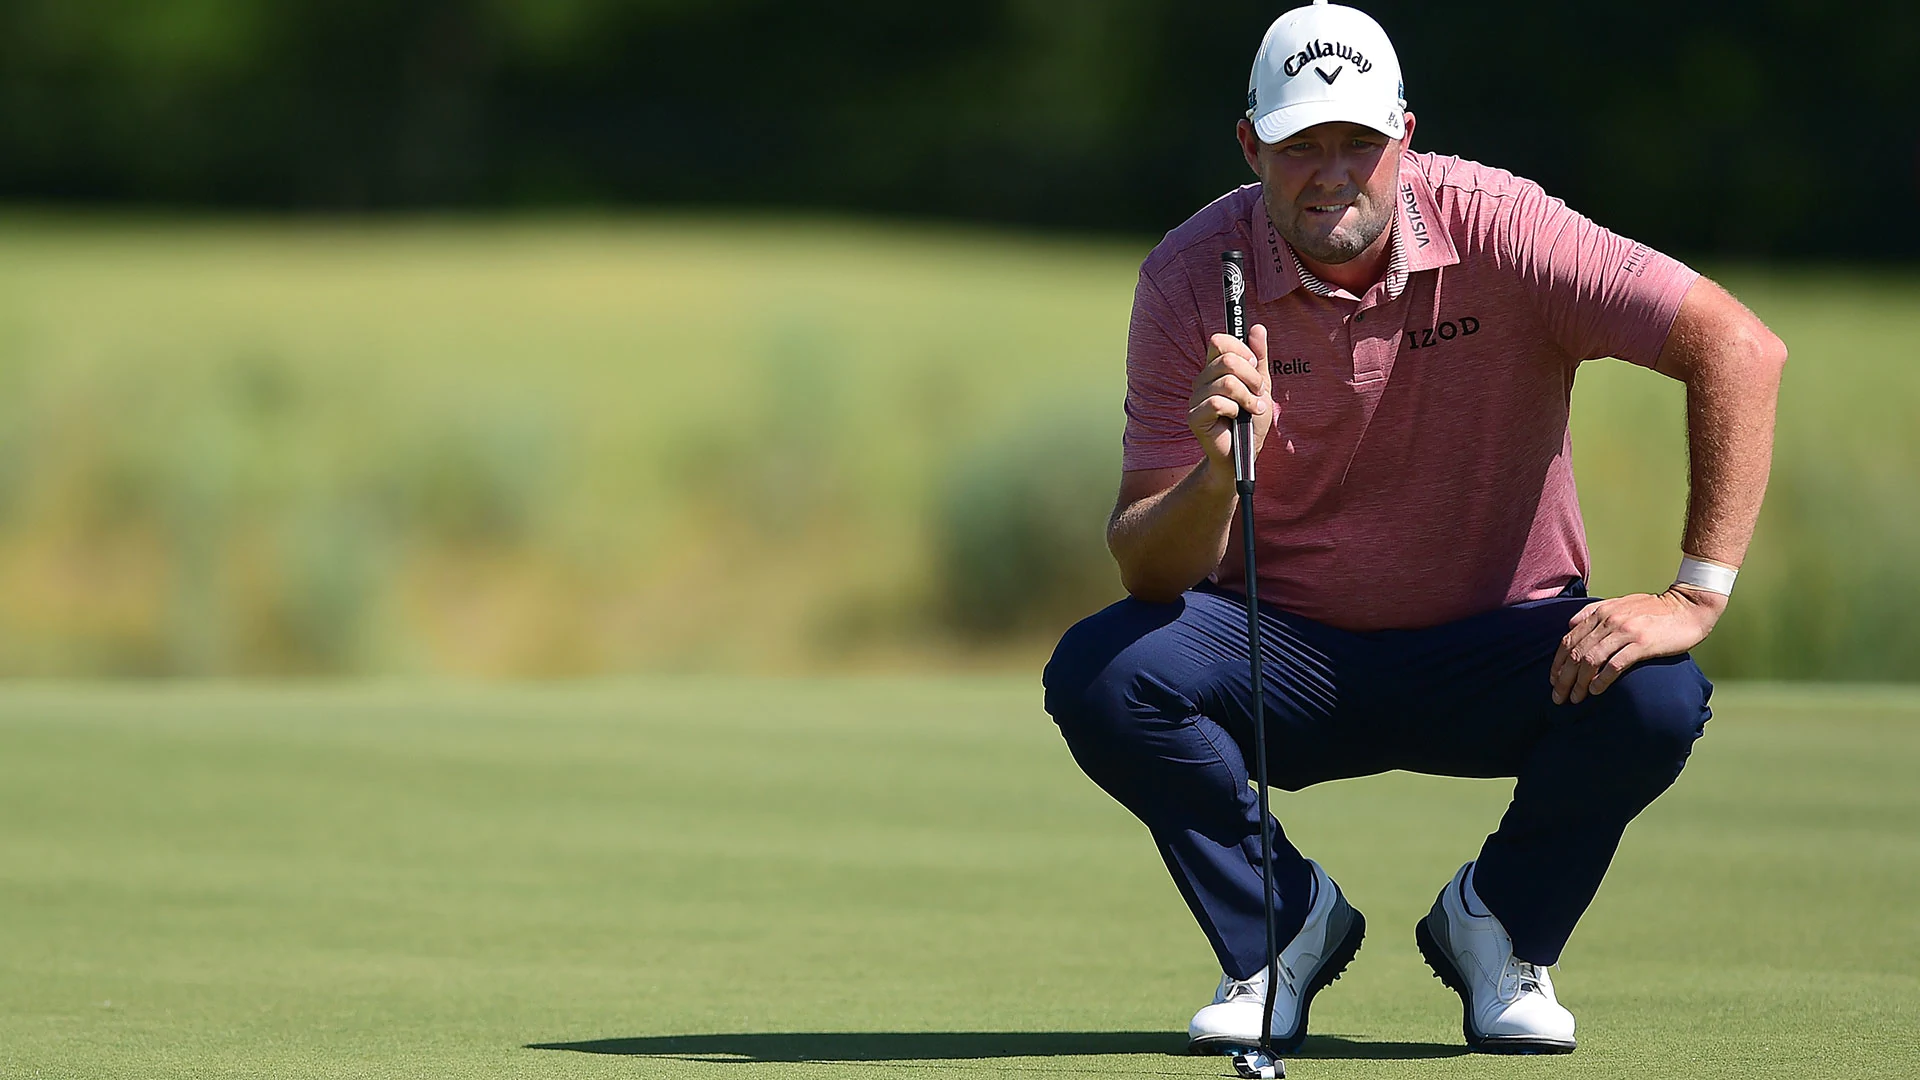 Leishman (66) rides red-hot putter to keep lead